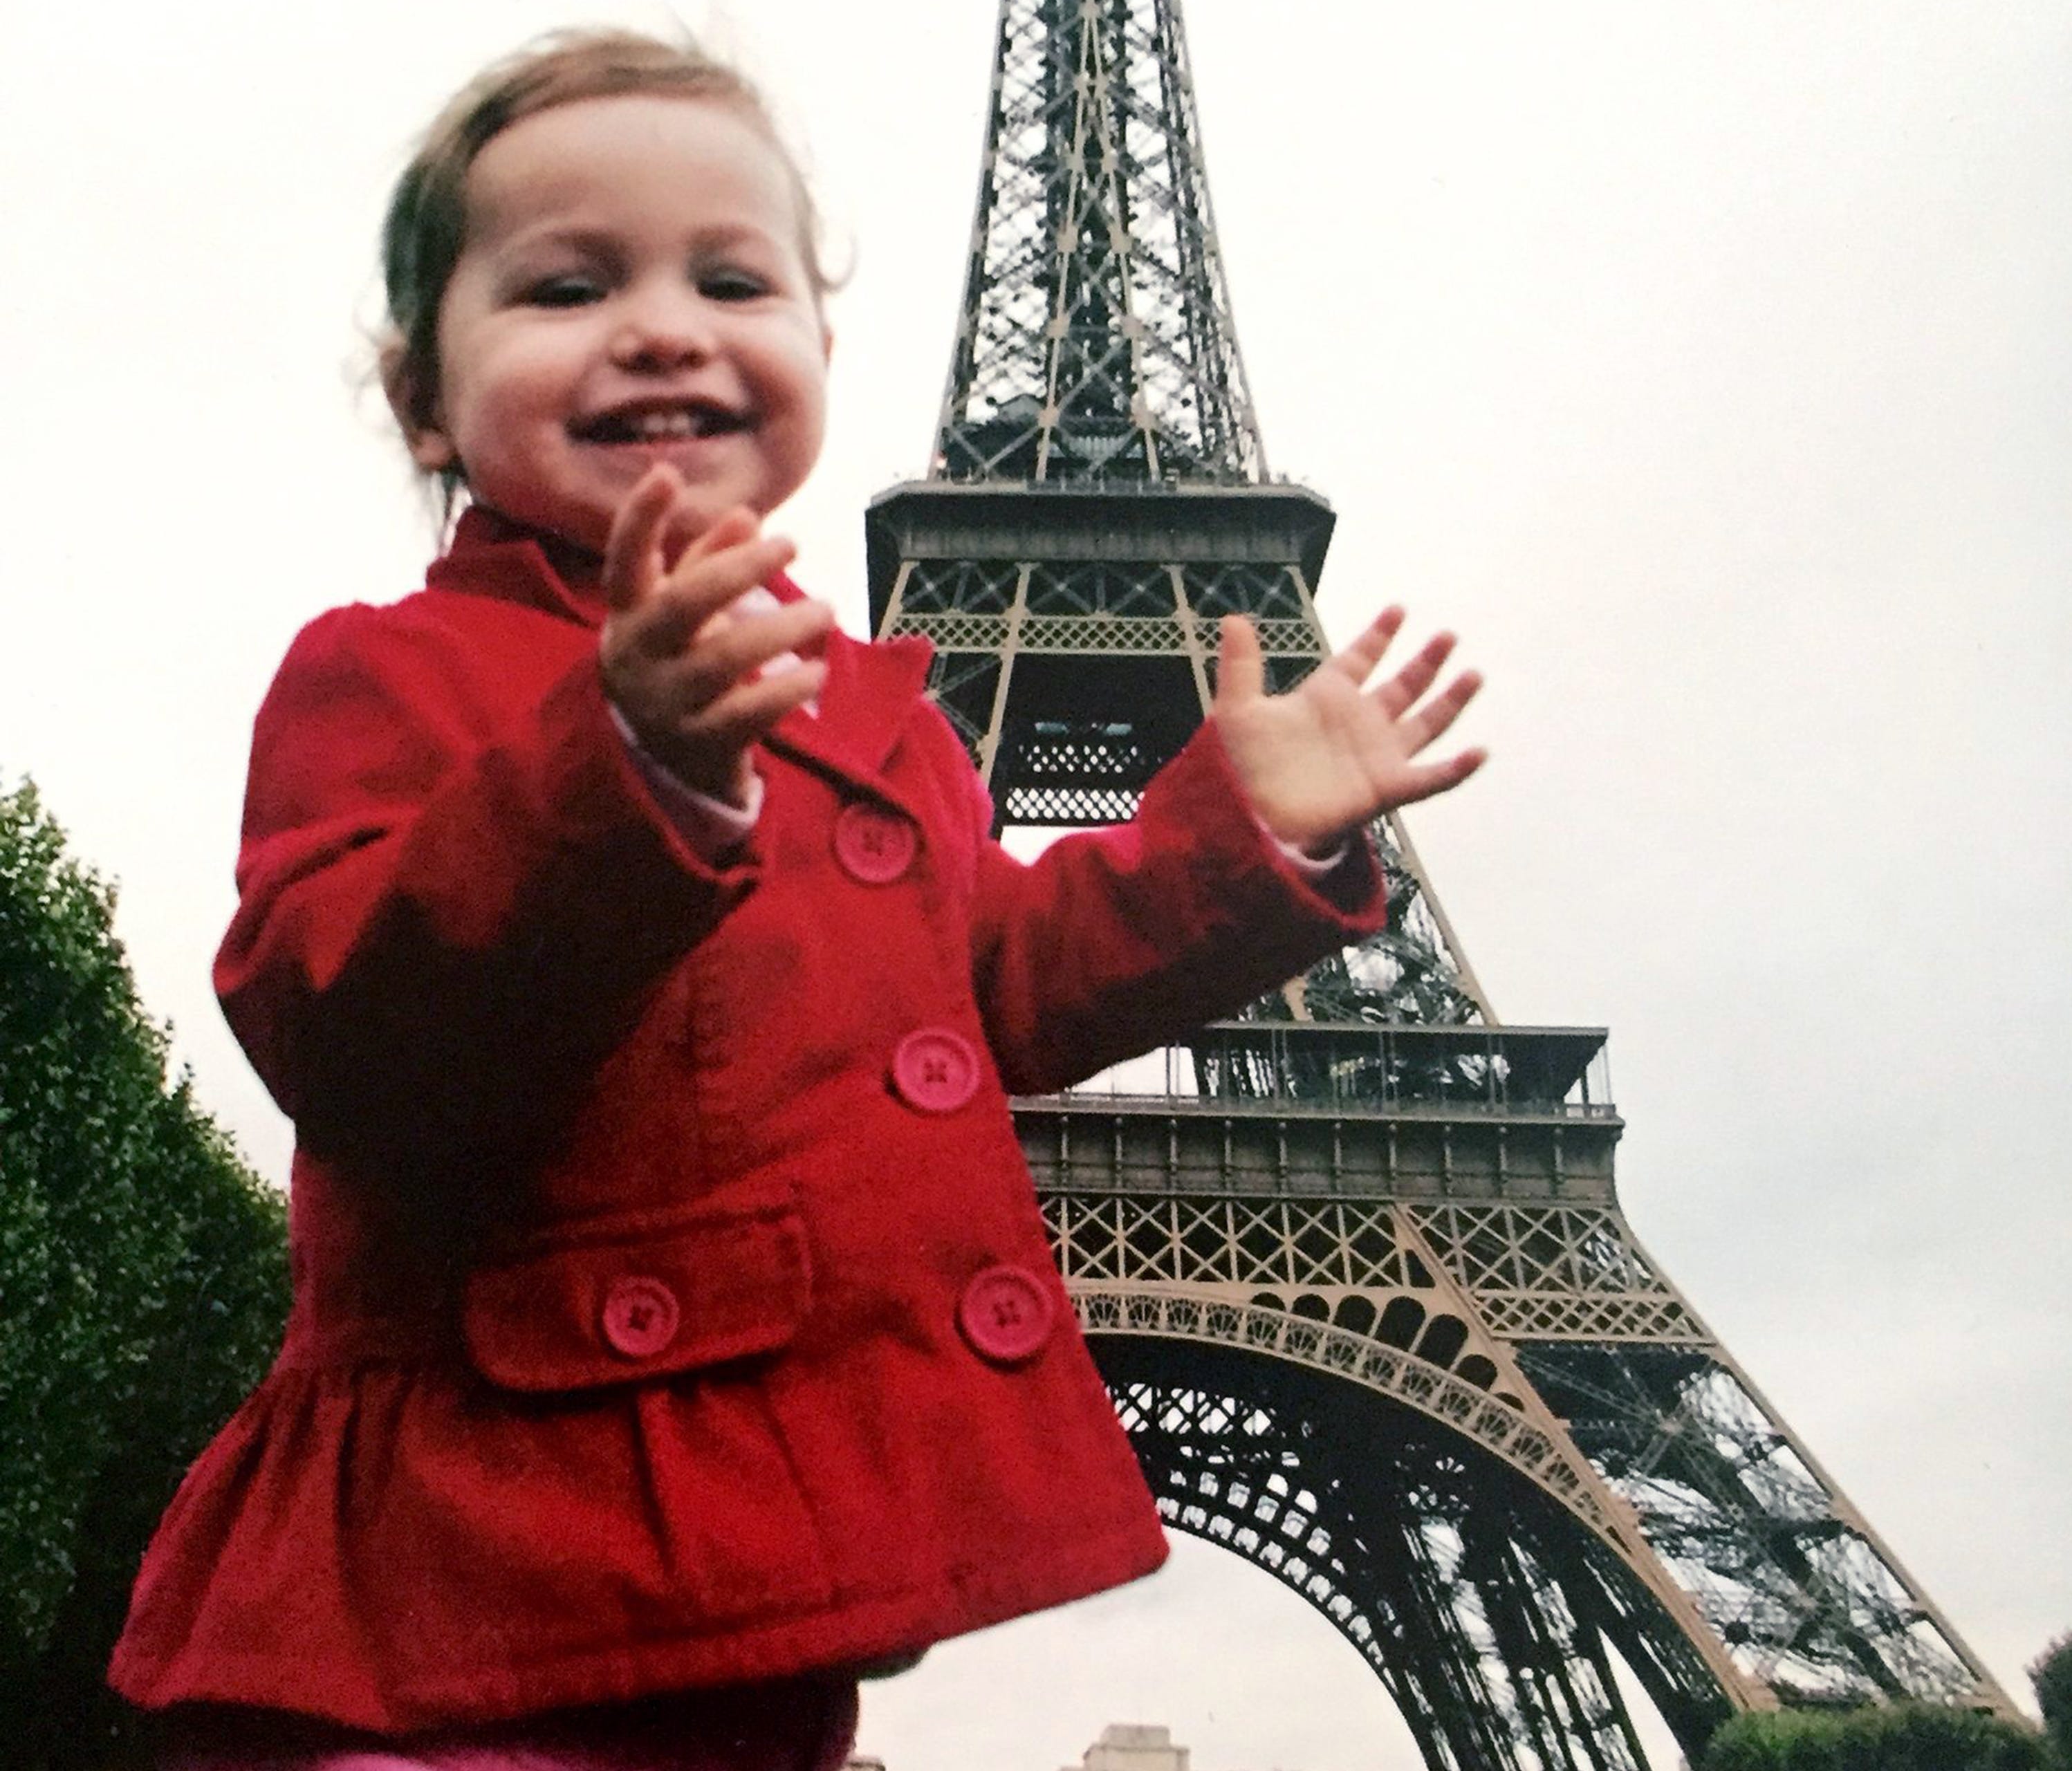 Julia Shamus, 18 months, claps with joy in October 2006 at the base of the Eiffel Tower in Paris.